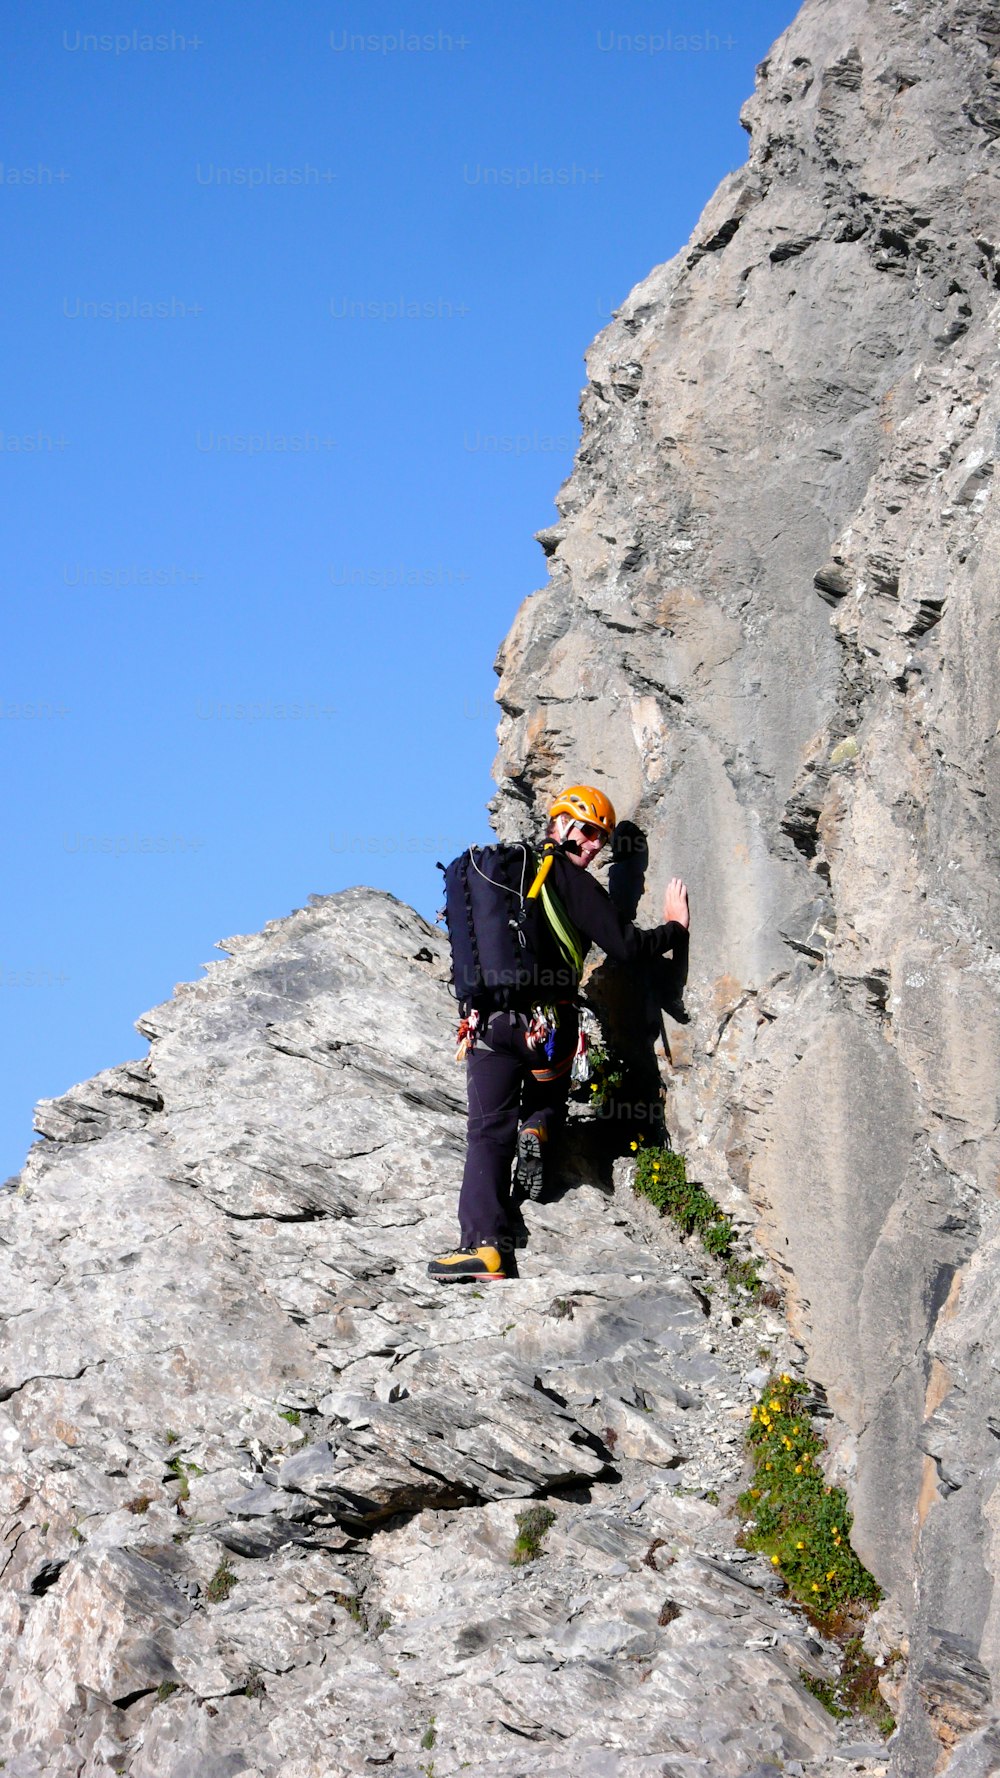 A male mountain climber at the start of a long climbing route under a clear blue sky